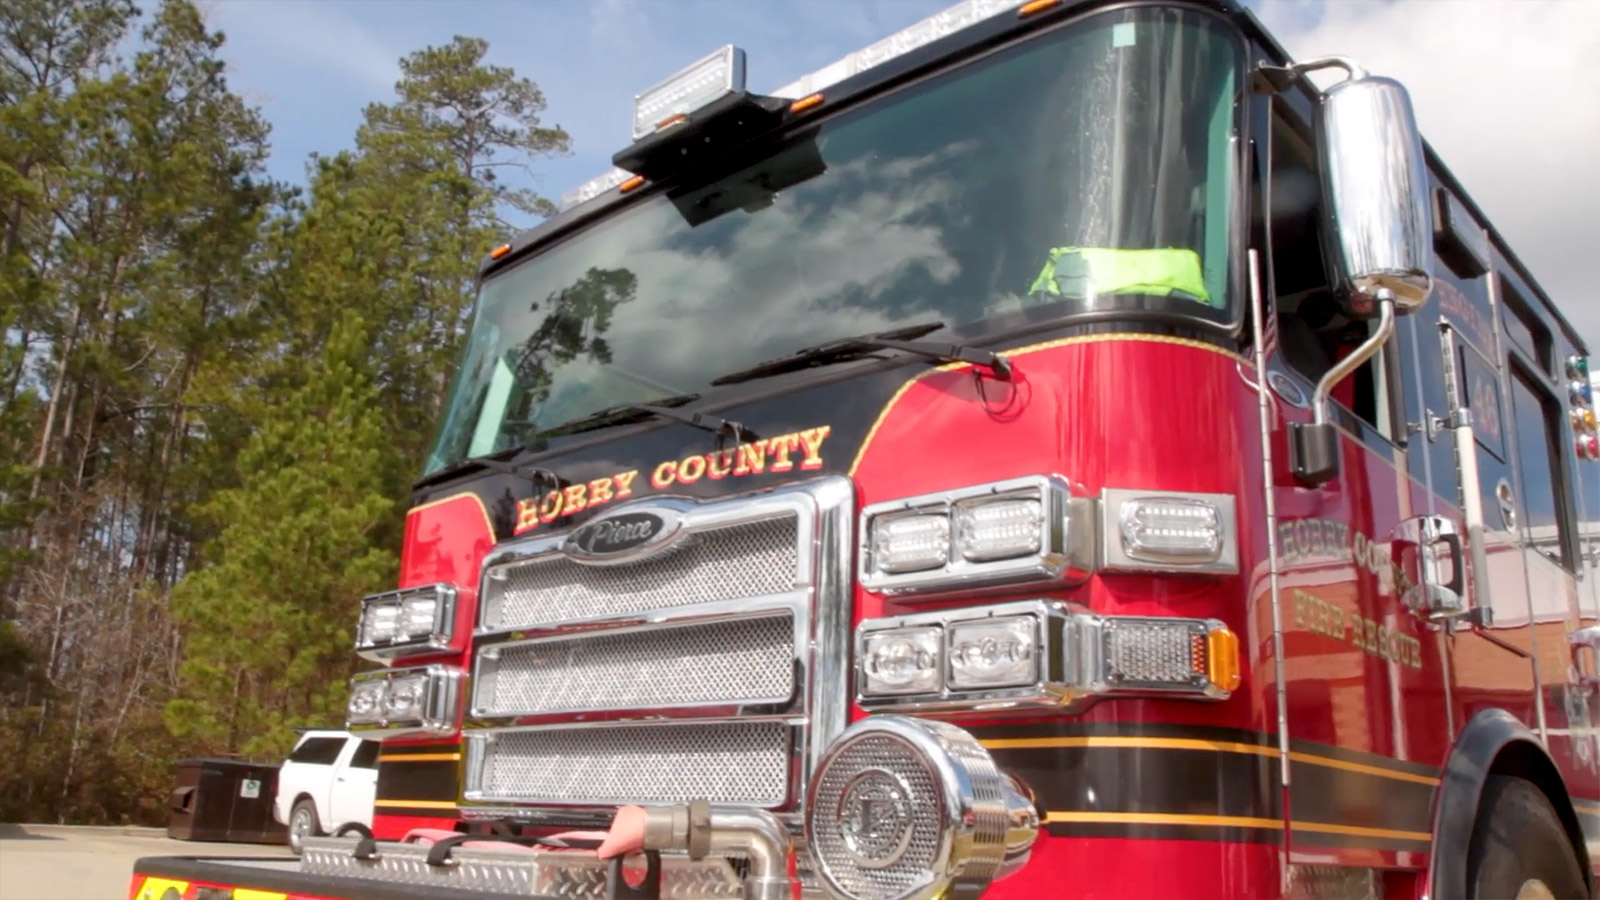 Horry County Fire Rescue Video